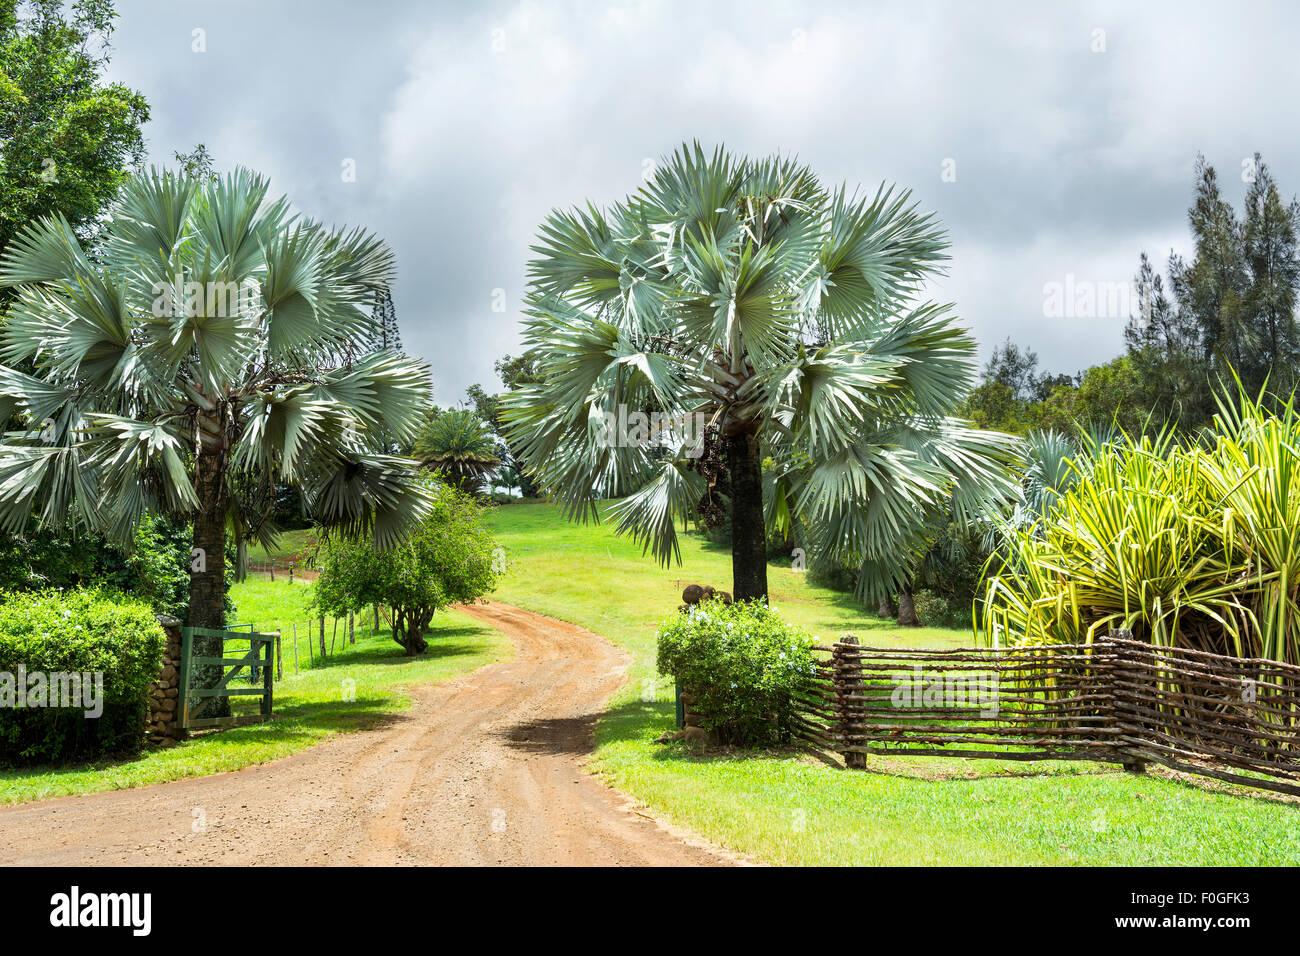 Entrance to a ranch in the highlands of Hawaii lined with trees and vibrant foliage. Stock Photo